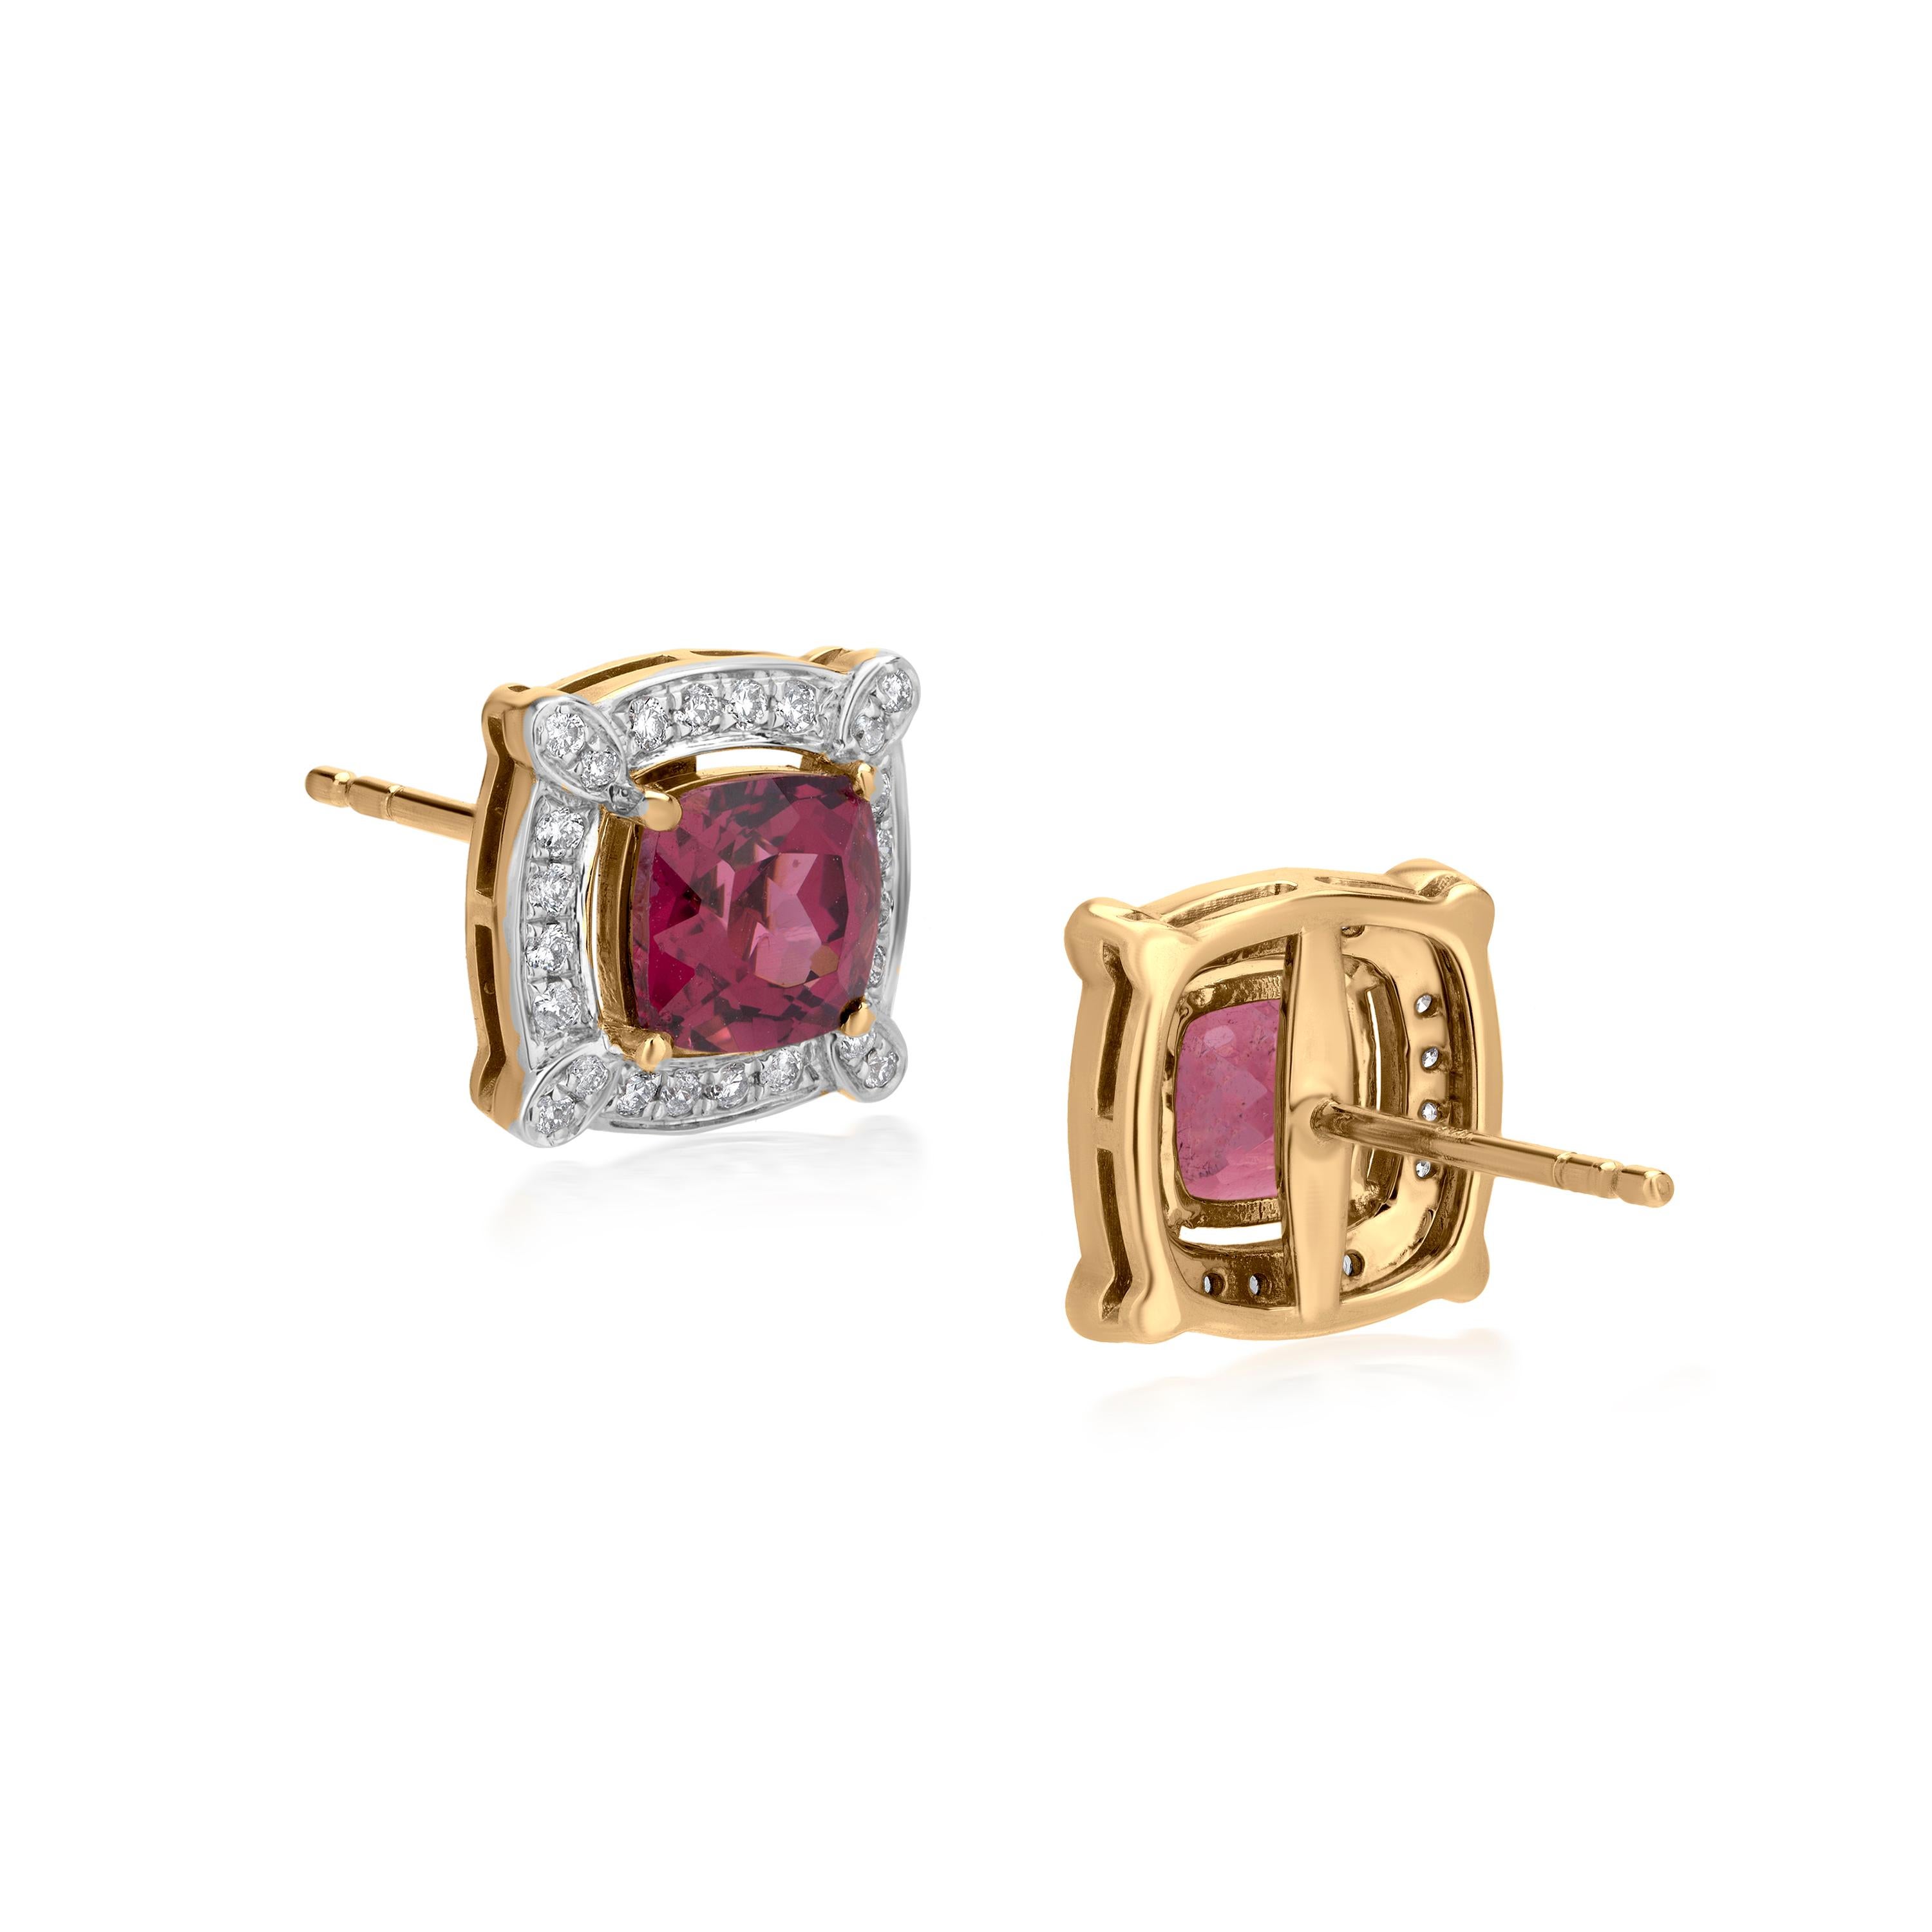 Cushion Cut Gemistry 2.94cttw Diamond Pave and Pink Garnet Prong Halo Stud Earrings For Sale